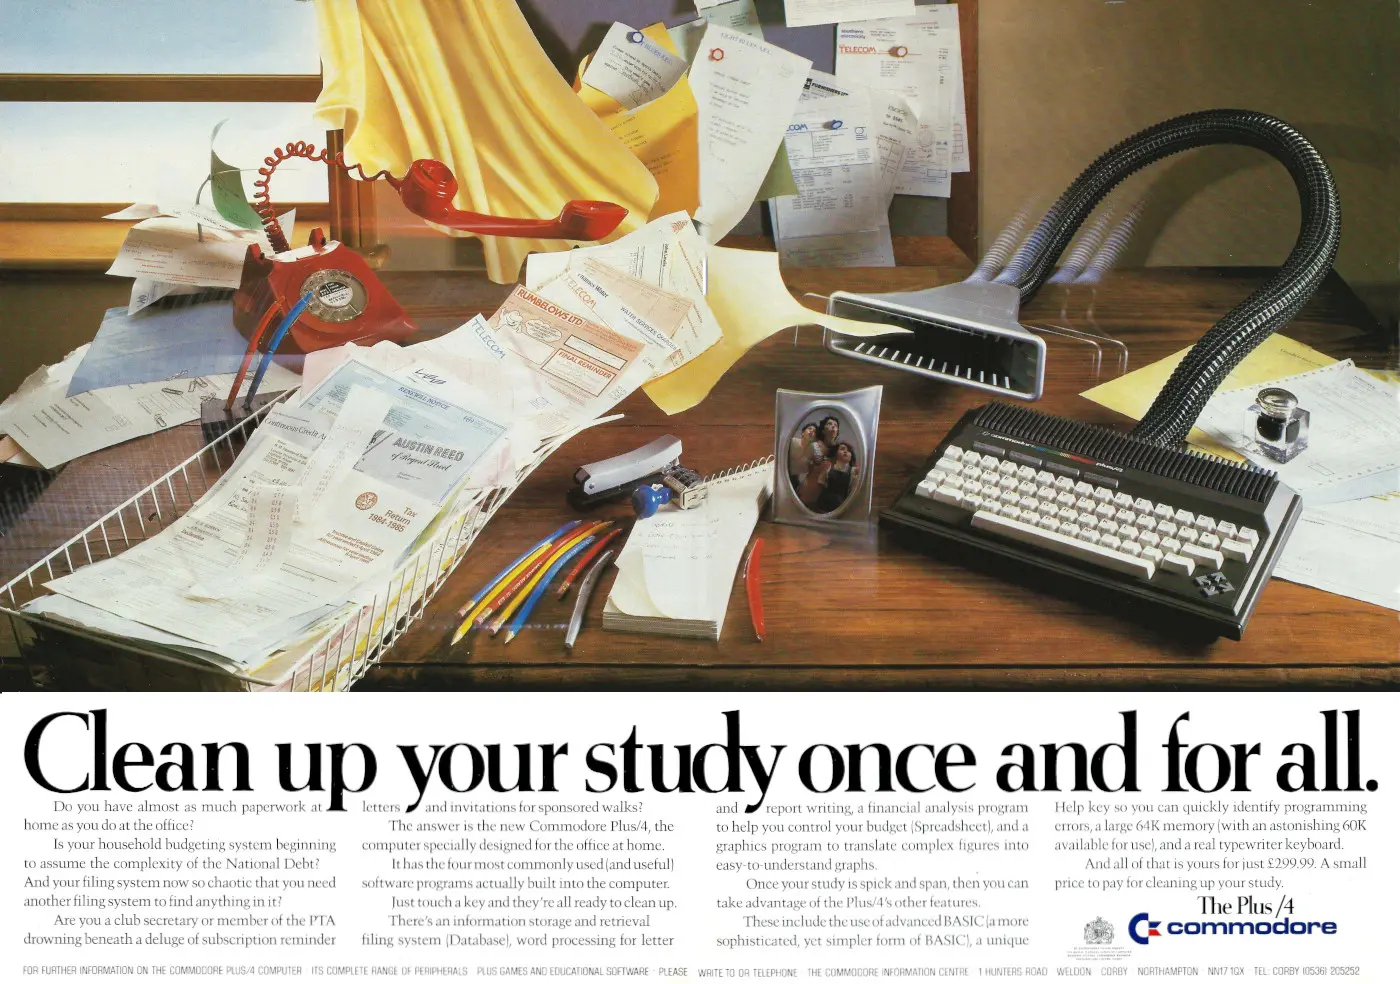 Commodore Advert: <b>Commodore Plus/4: Clean up your study once and for all</b>, from Business Magazine, July 1984